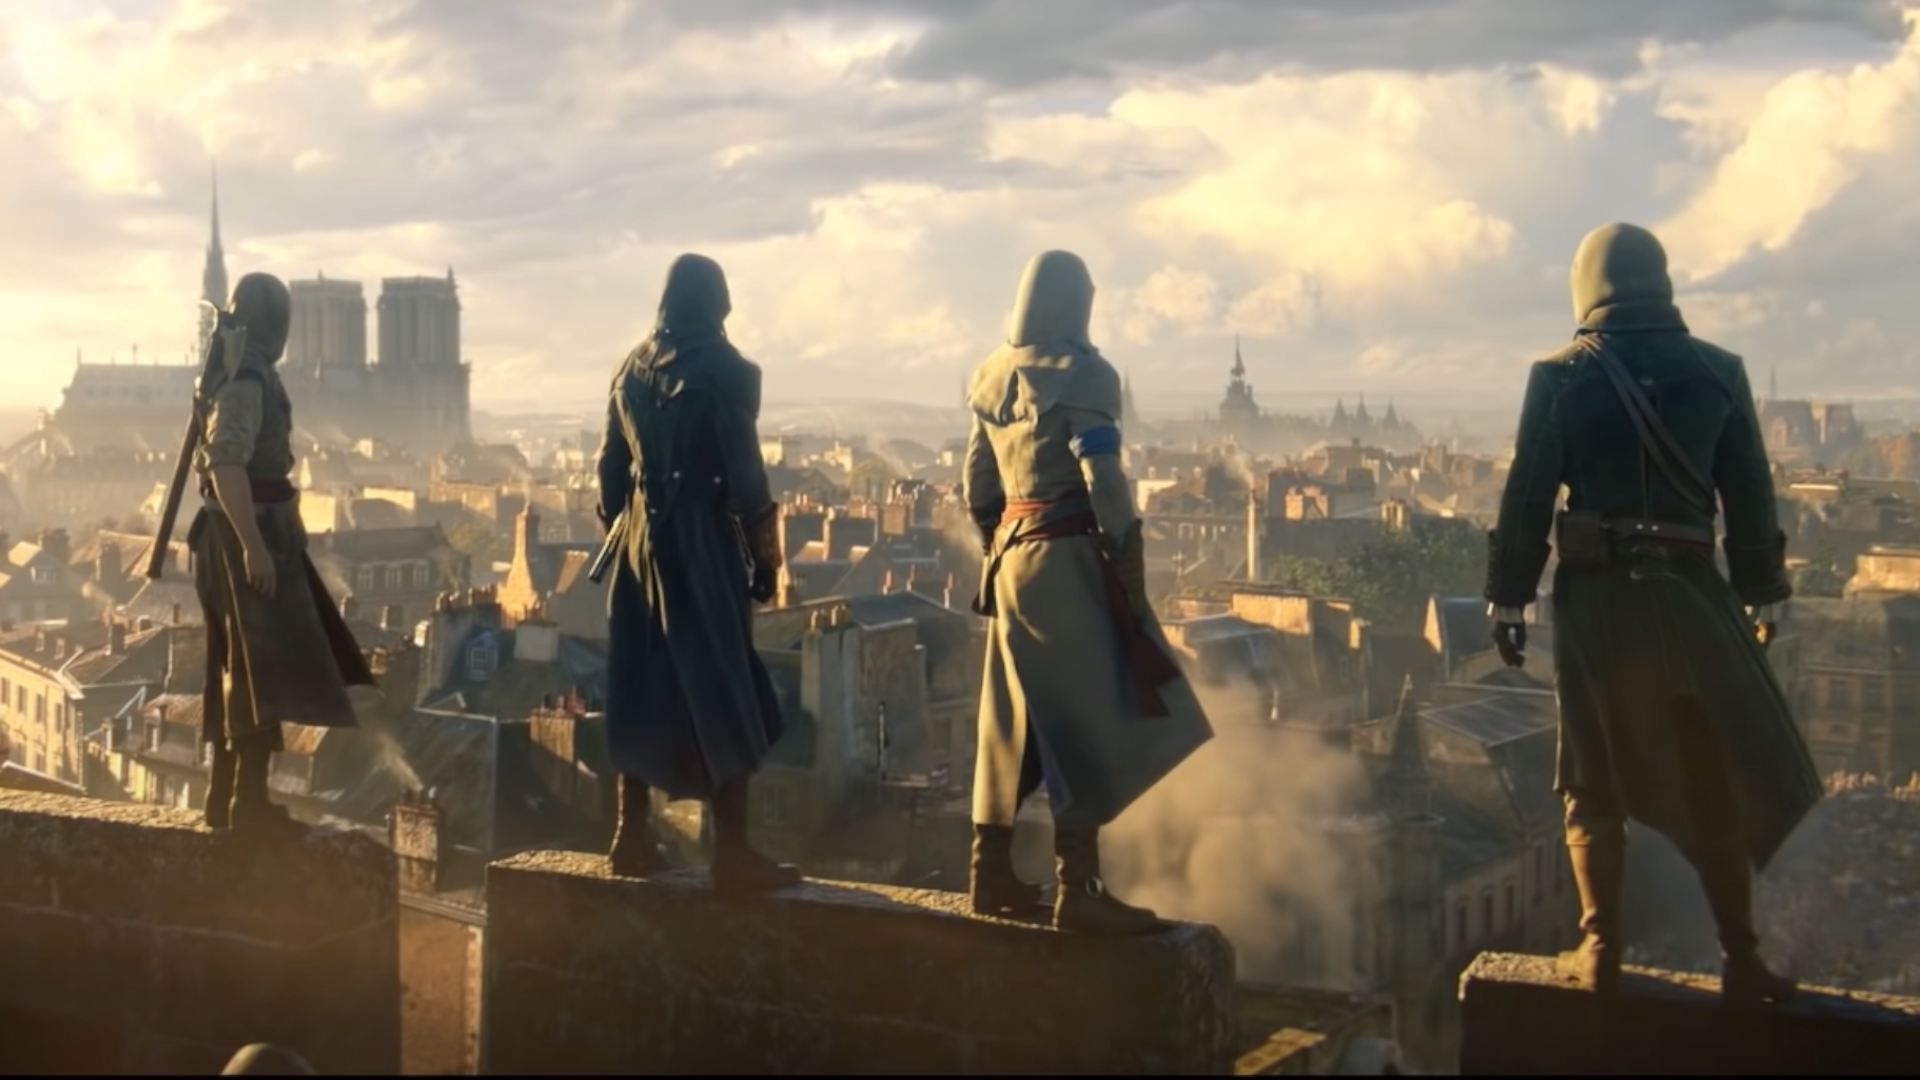 Four assassins standing on a rooftop with their backs to the camera